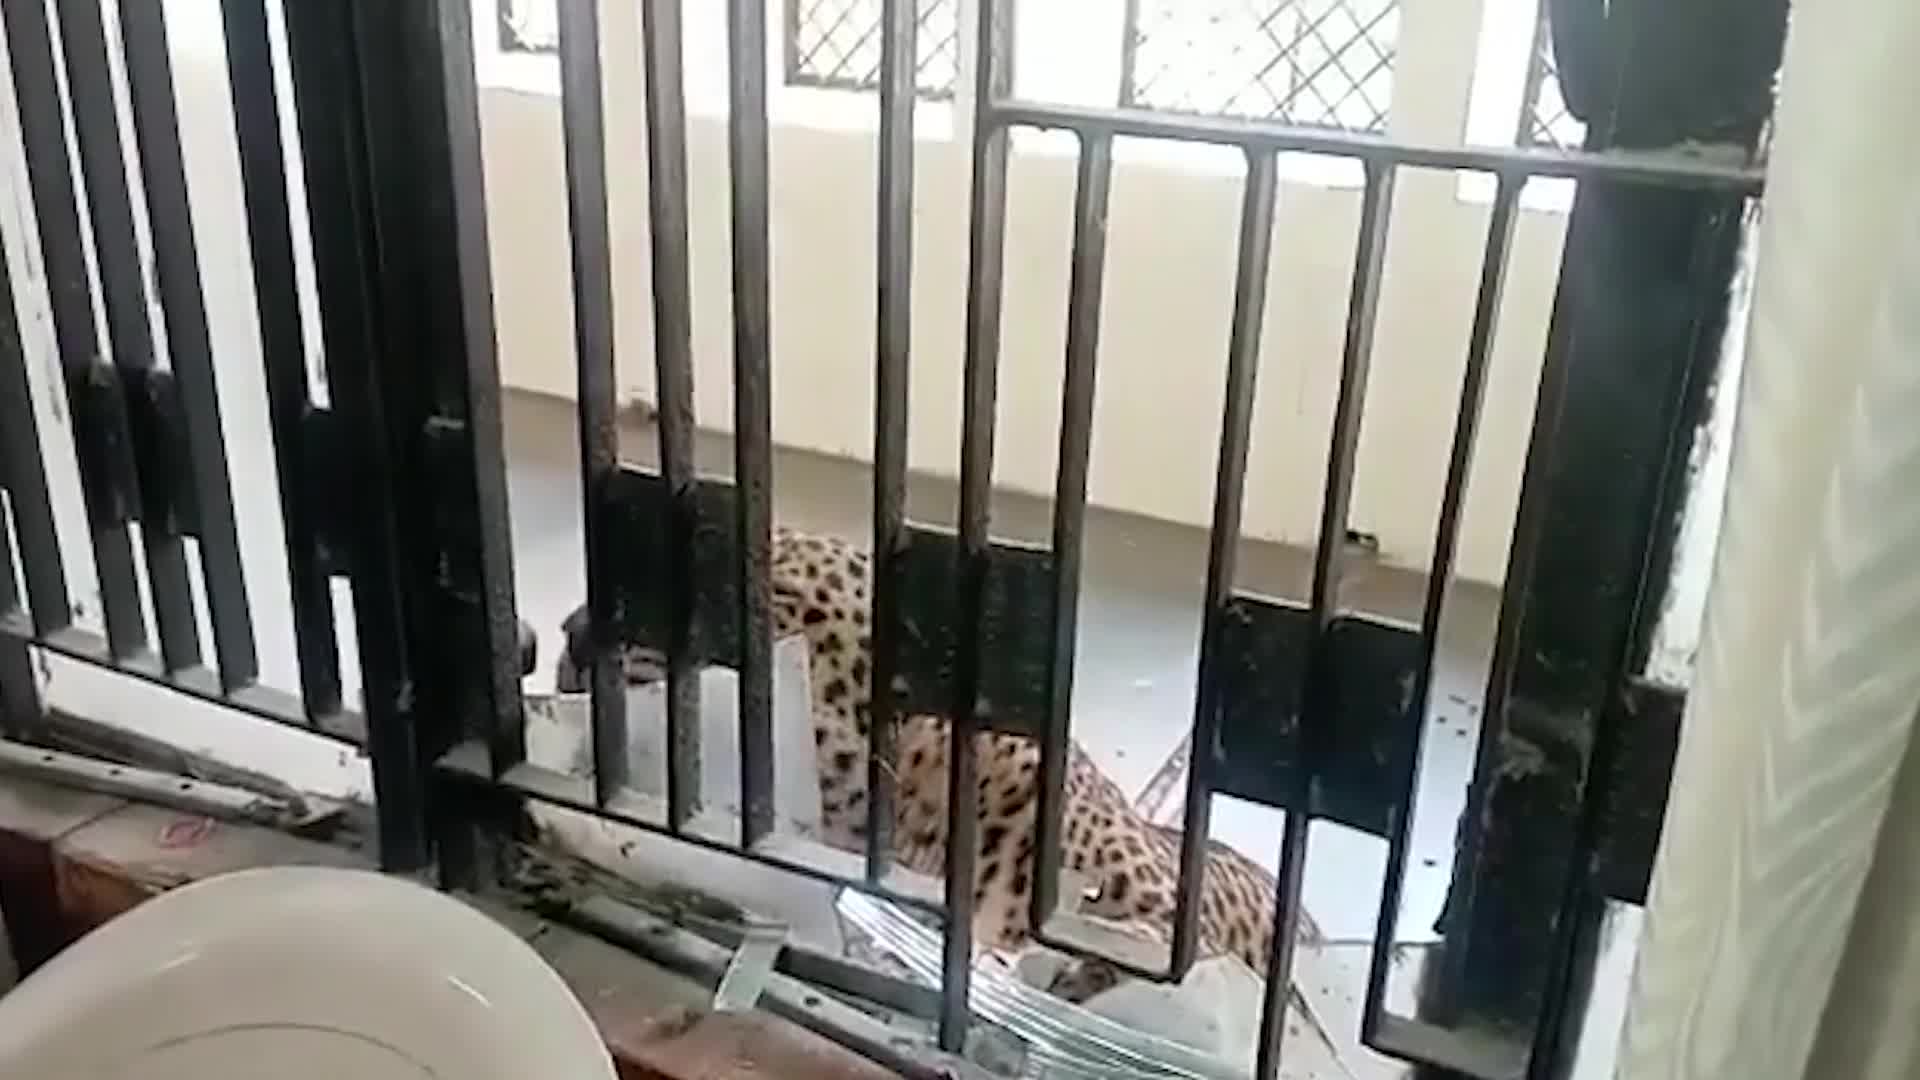 Life - Wild leopards attack at court injuring 8 people (Figure 2).